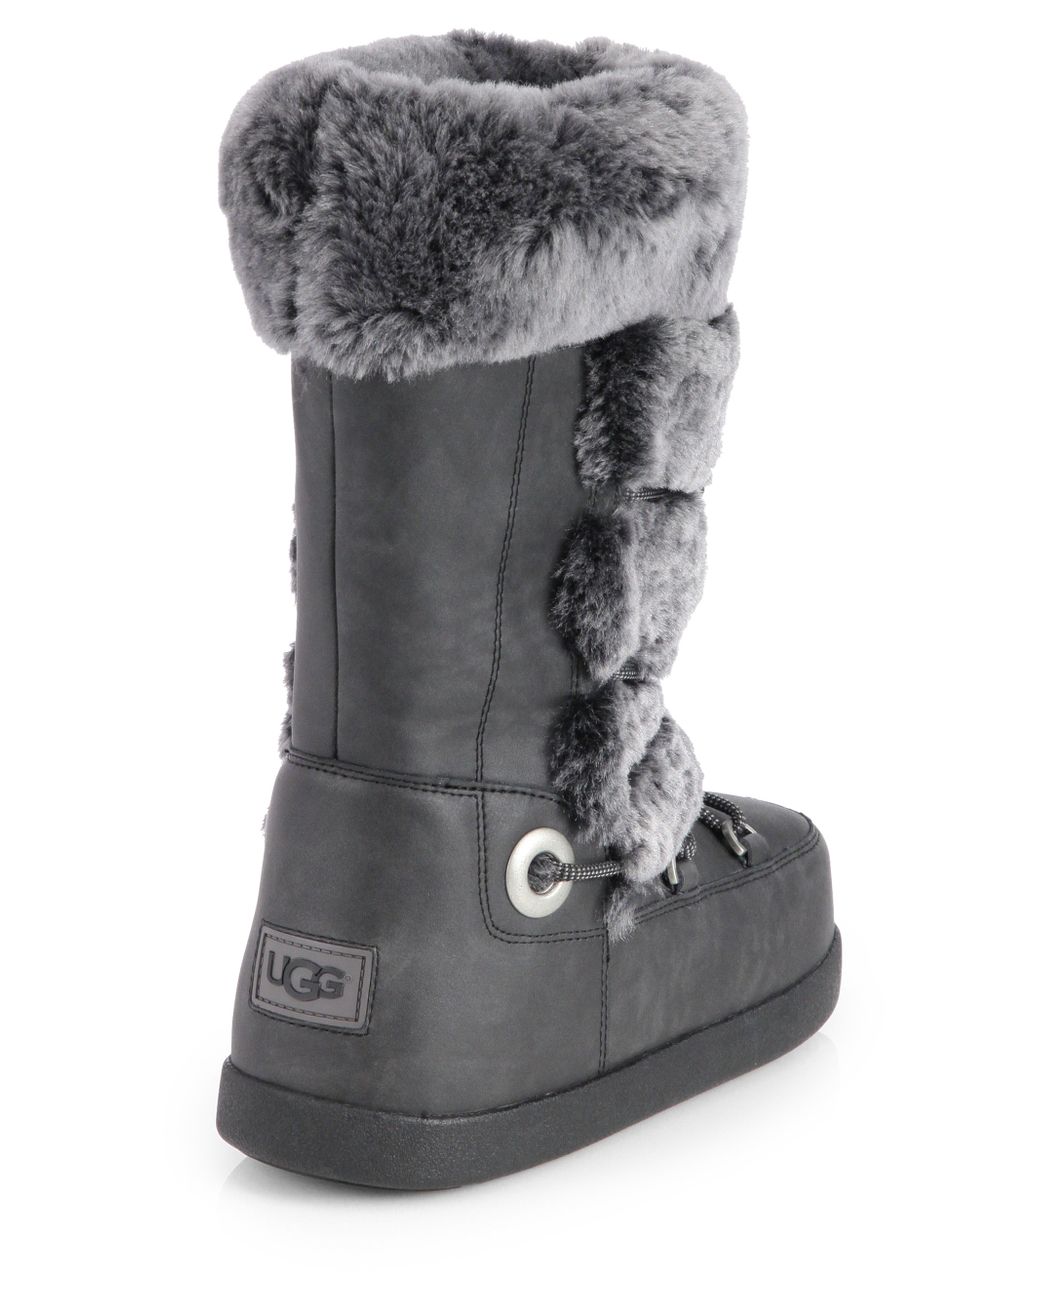 UGG Julette Shearling Leather Moon Boots in Black | Lyst